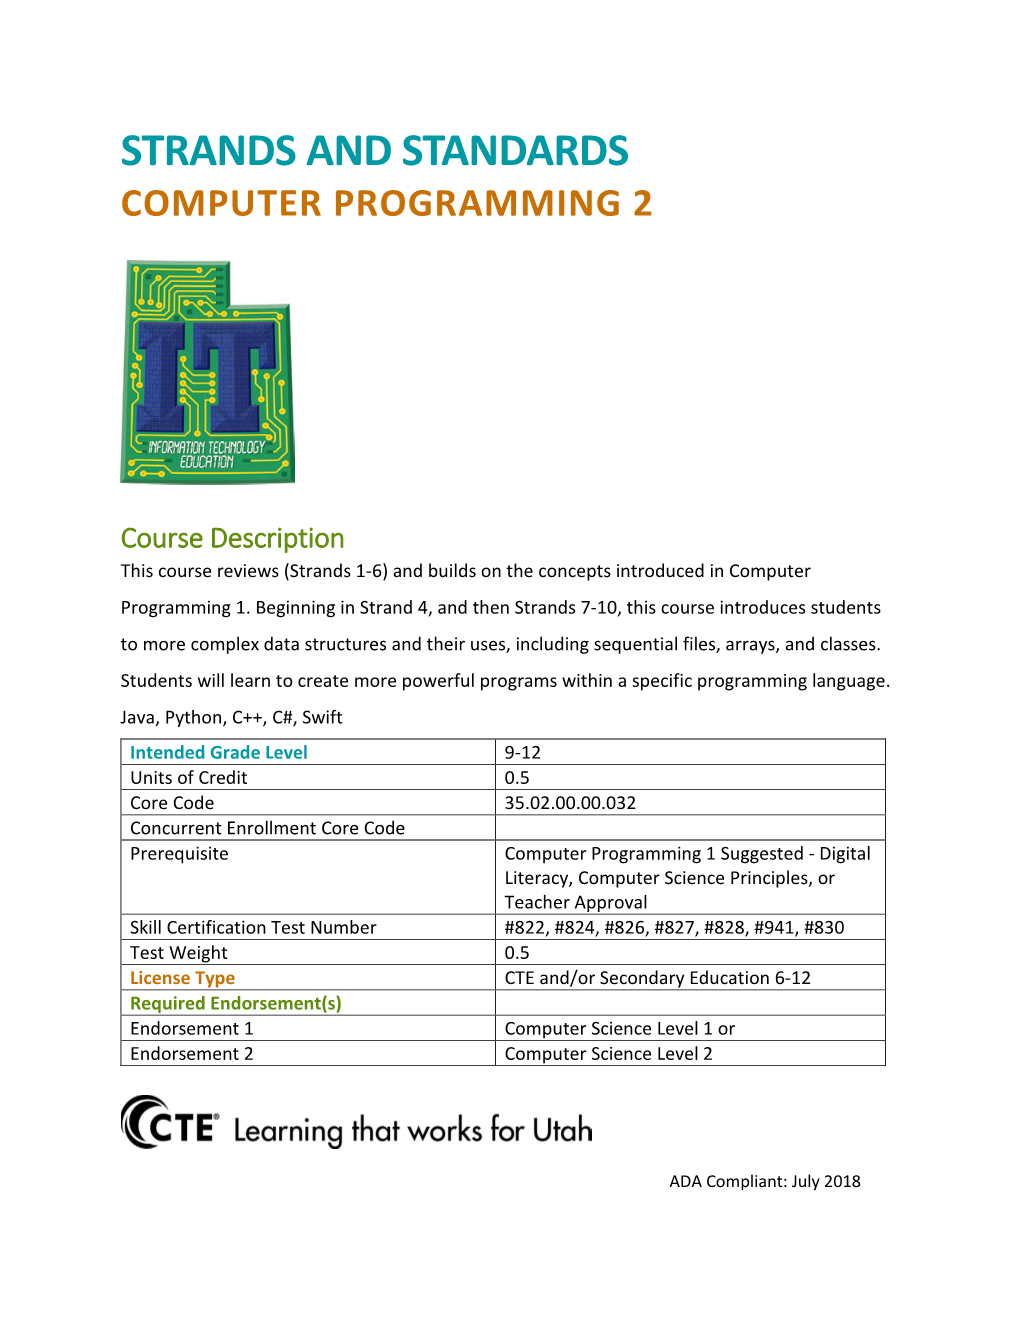 Computer Programming 2 Strands and Standards